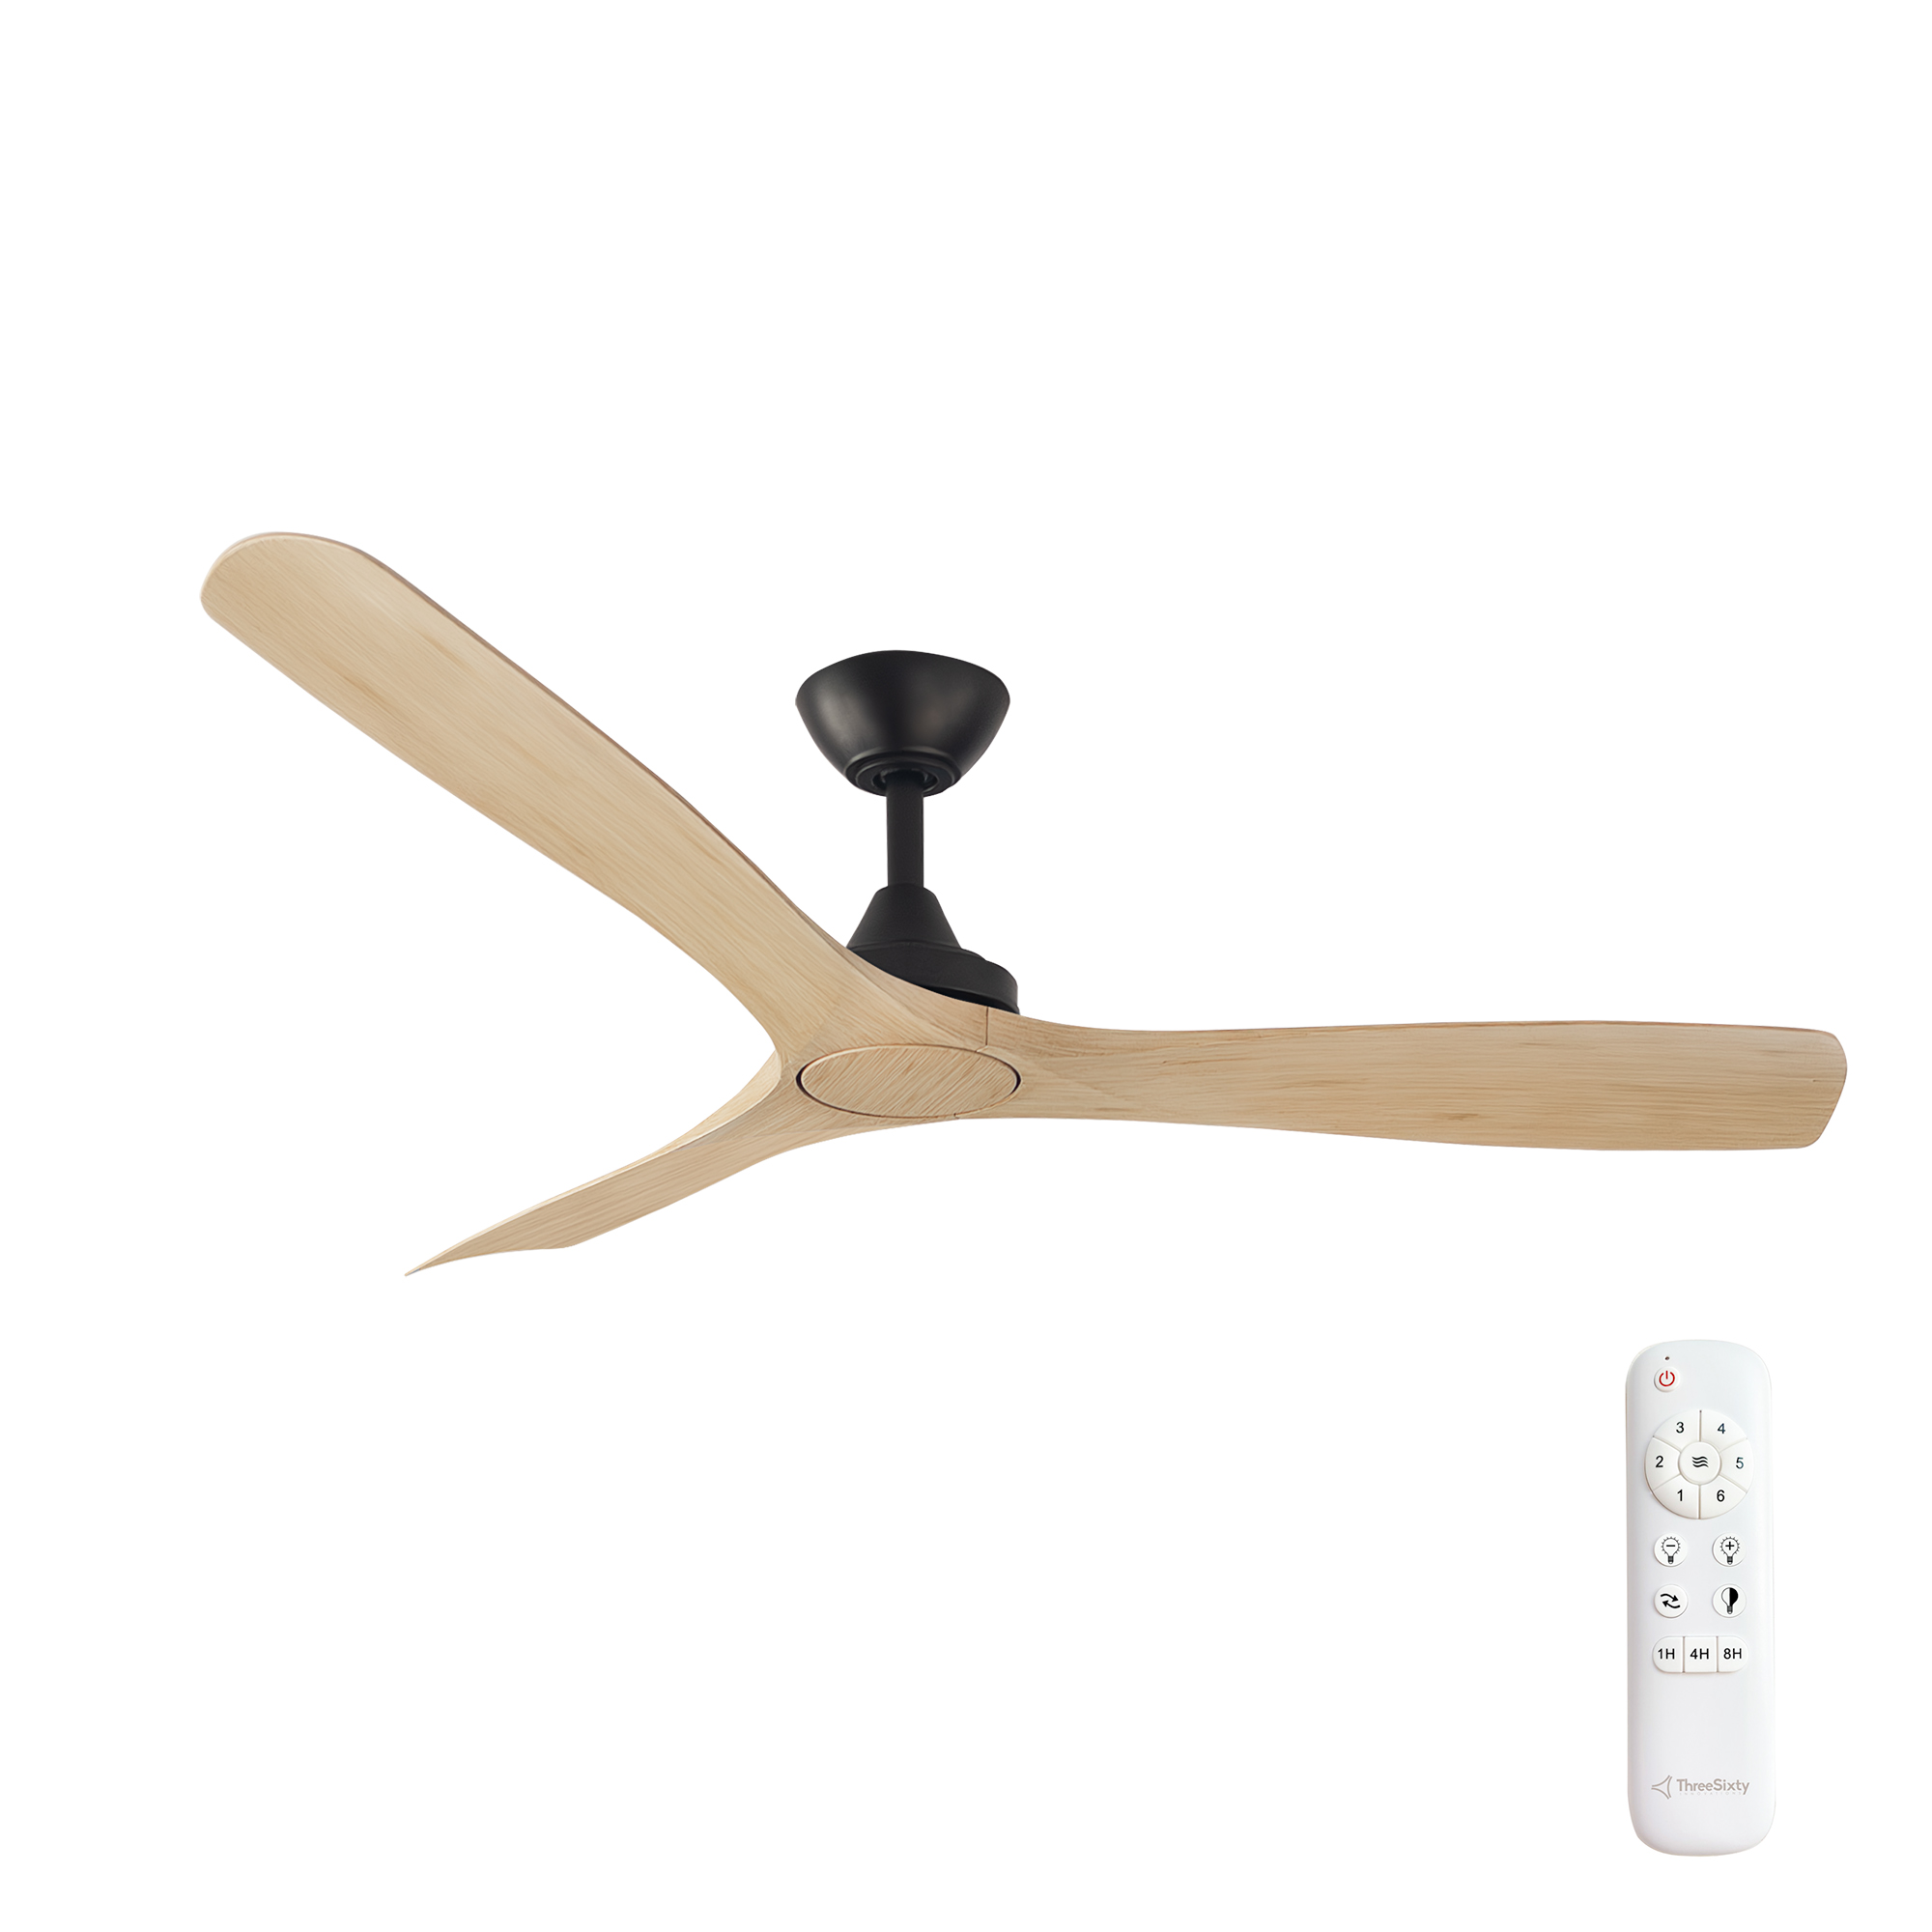 52" Spitfire DC Ceiling Fan in Black with Natural blades